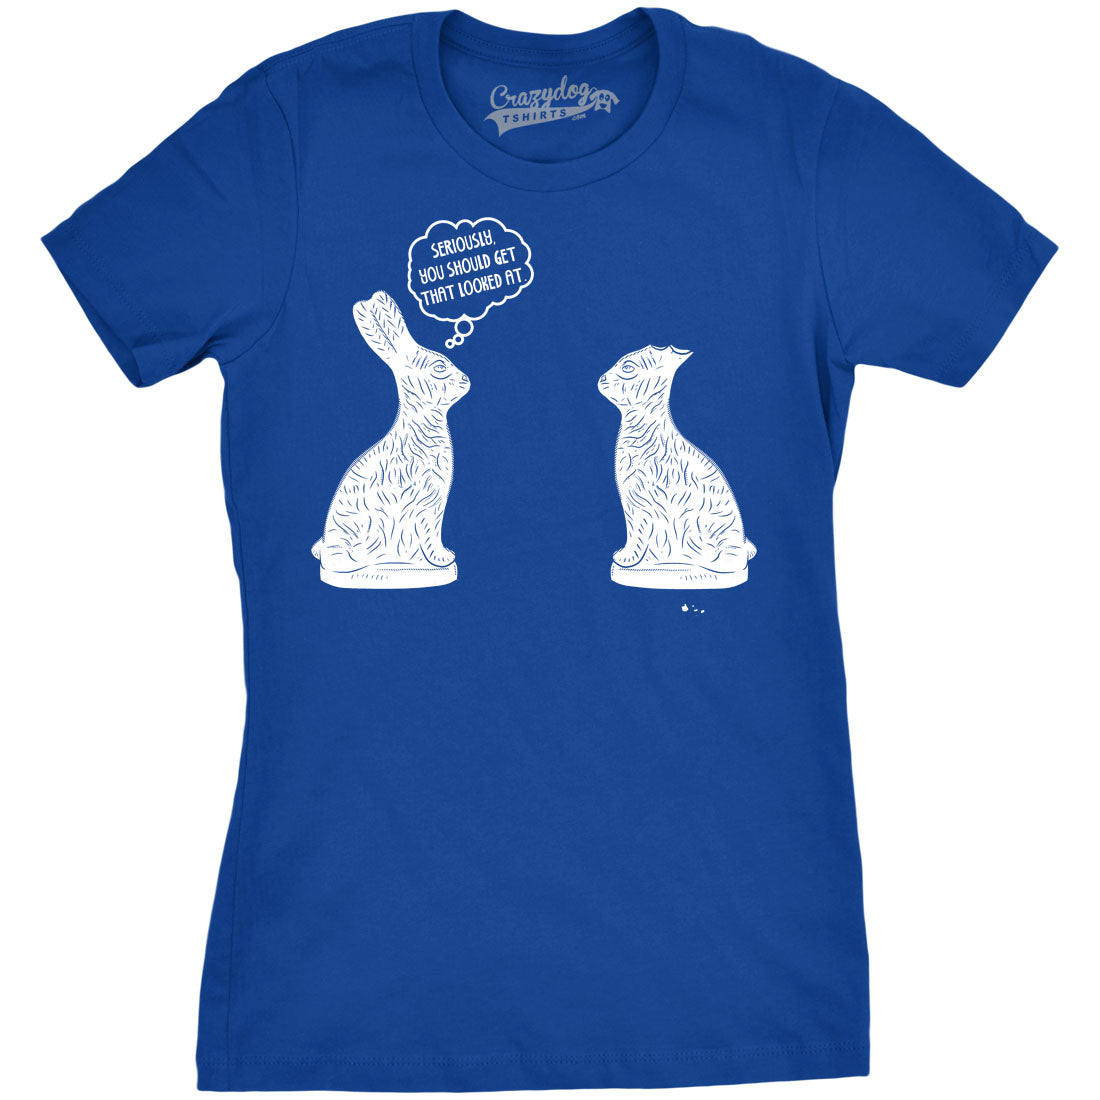 Funny Blue You Should Get That Looked At Womens T Shirt Nerdy Easter Tee